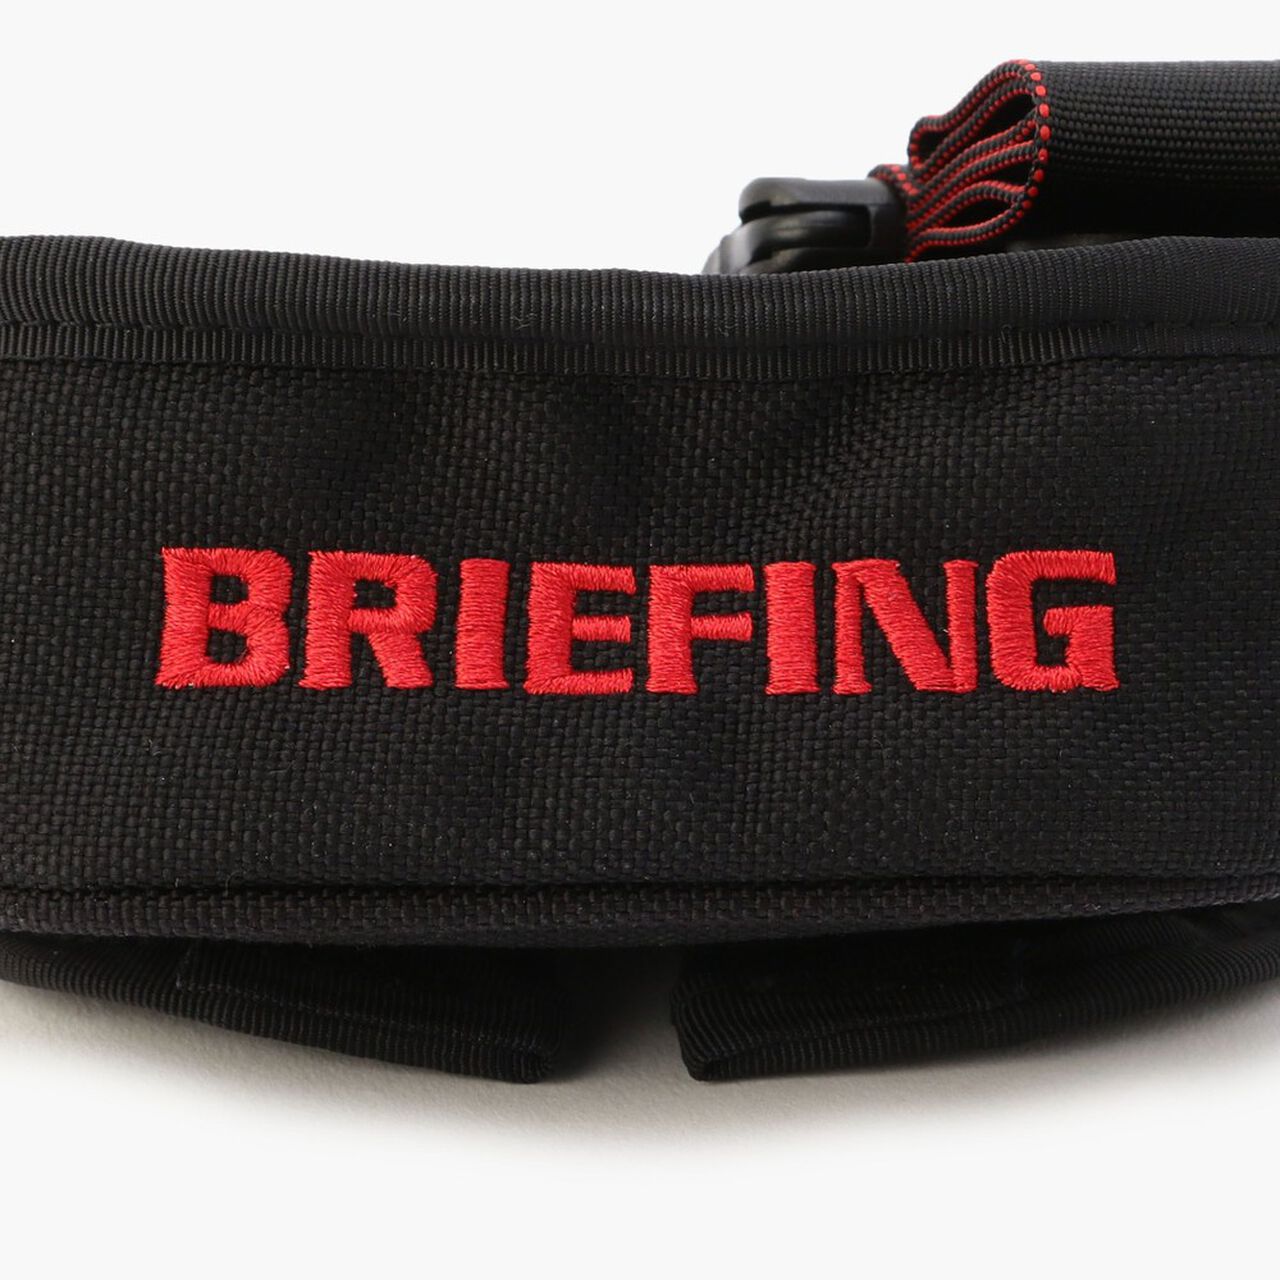 Grizzly Padded Lifting Strap